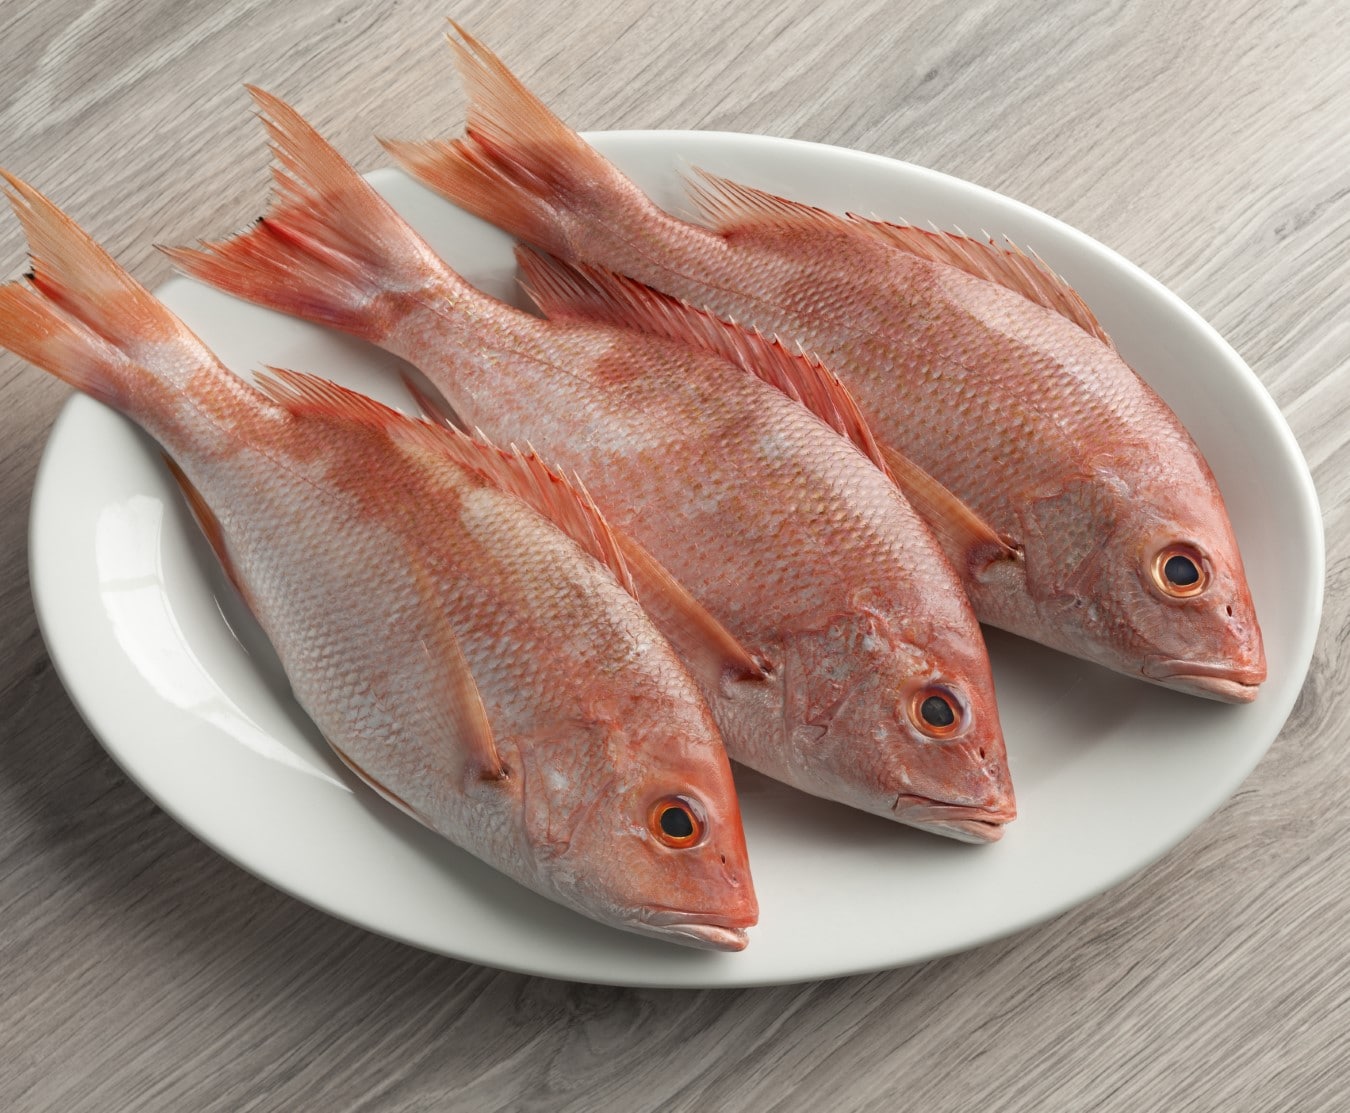 Buy Red Snapper 1kg Online at the Best Price Free UK Delivery